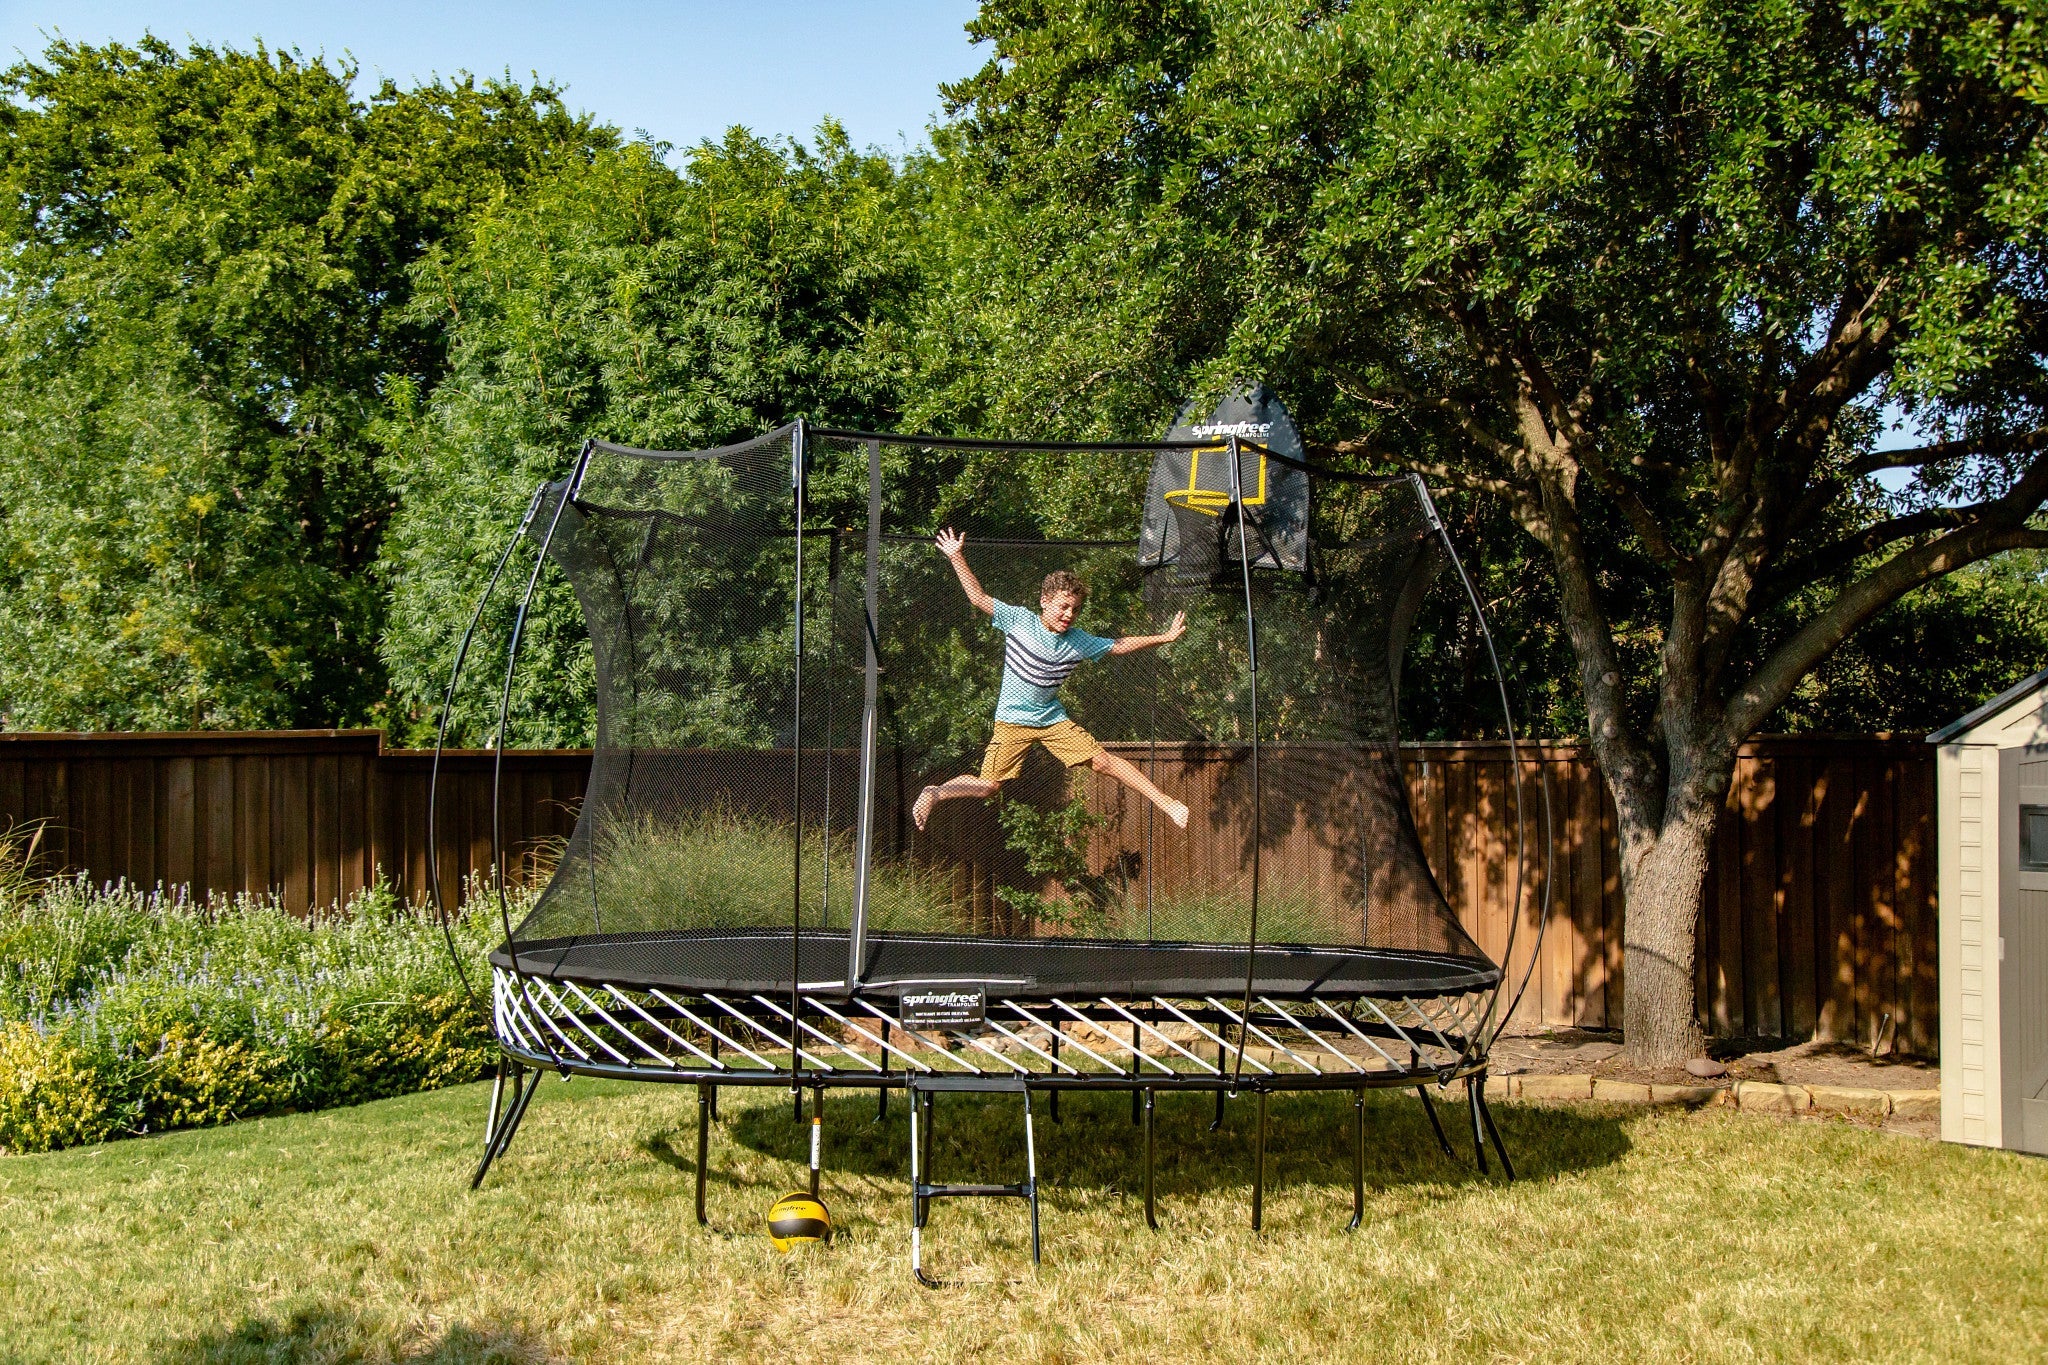 Medium Oval Trampoline - 8x11' Recreations Outlet